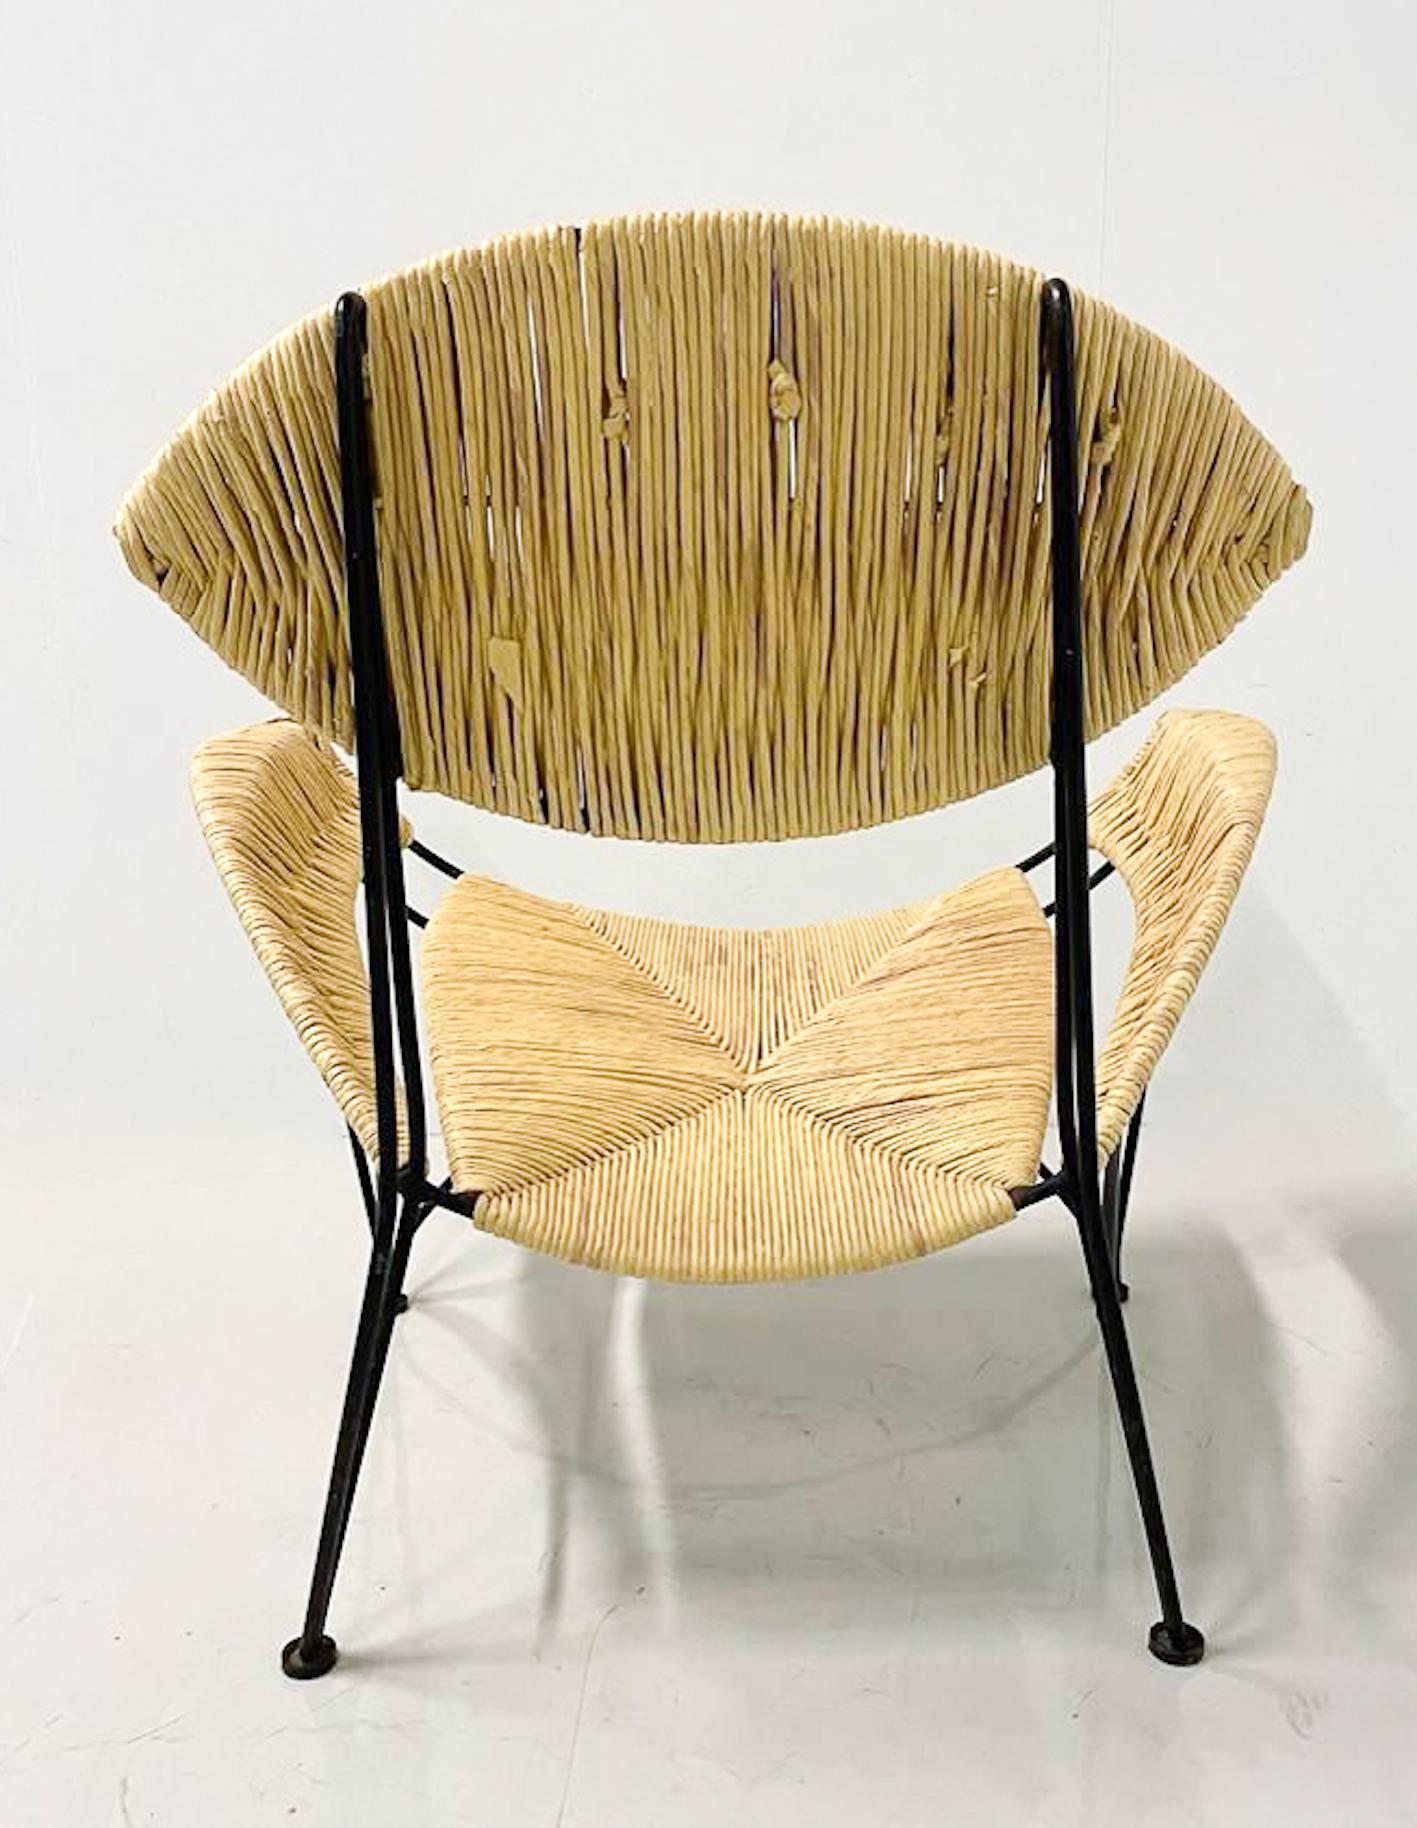 Late 20th Century Mid-Century Modern Banana Chair by Tom Dixon for Capellini, 1980s For Sale